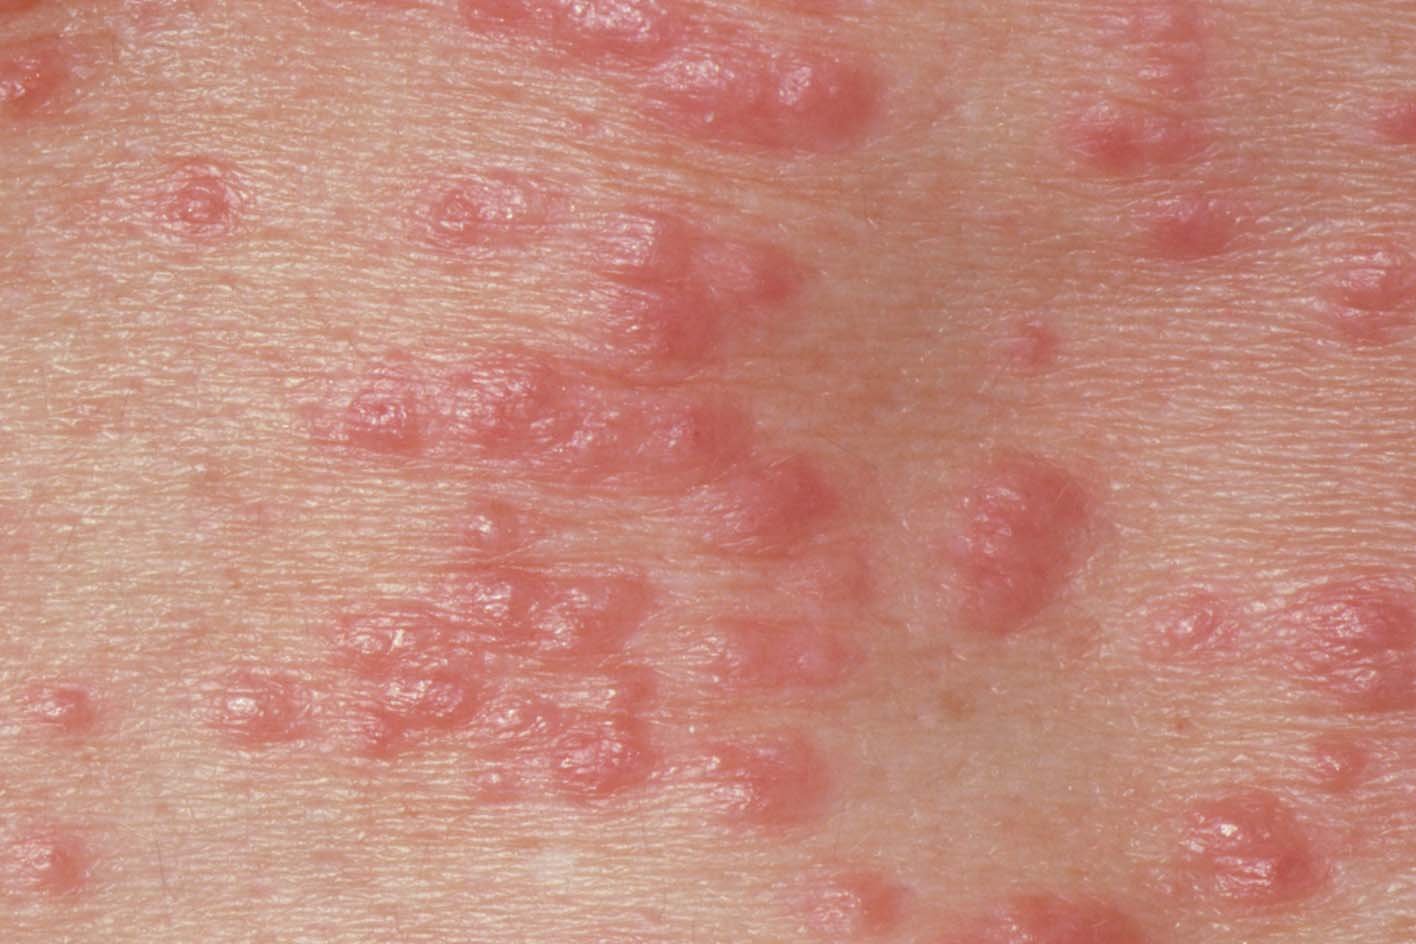 https://www.tewv.nhs.uk/content/uploads/2022/04/Scabies-image-from-NHS-England.jpg